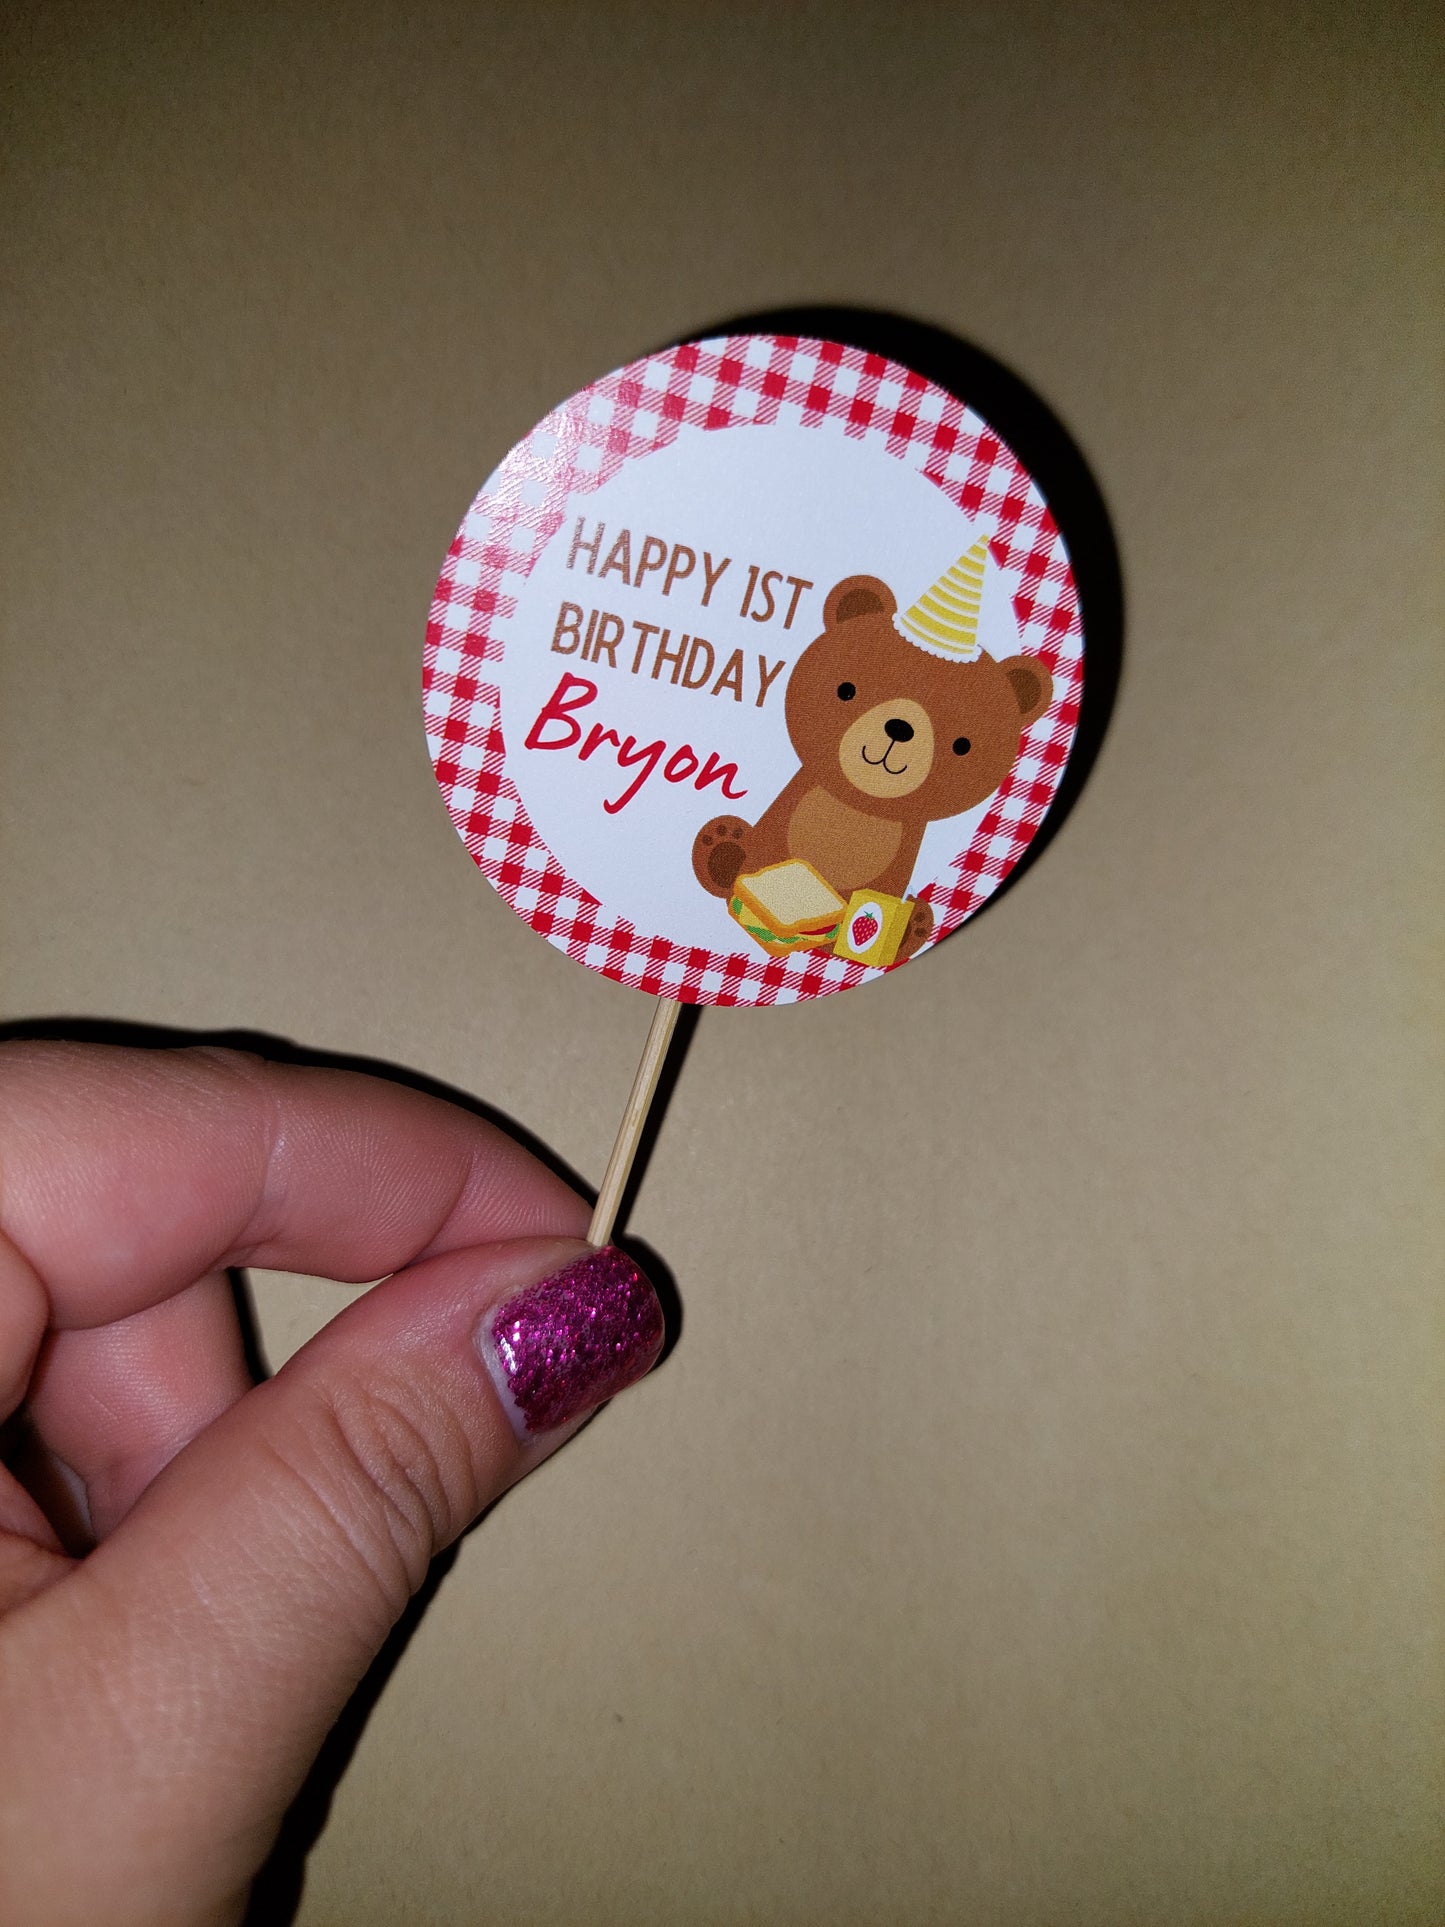 Red Teddy Bear Picnic Cupcake Toppers | Birthday Cupcake Toppers | Party Decorations